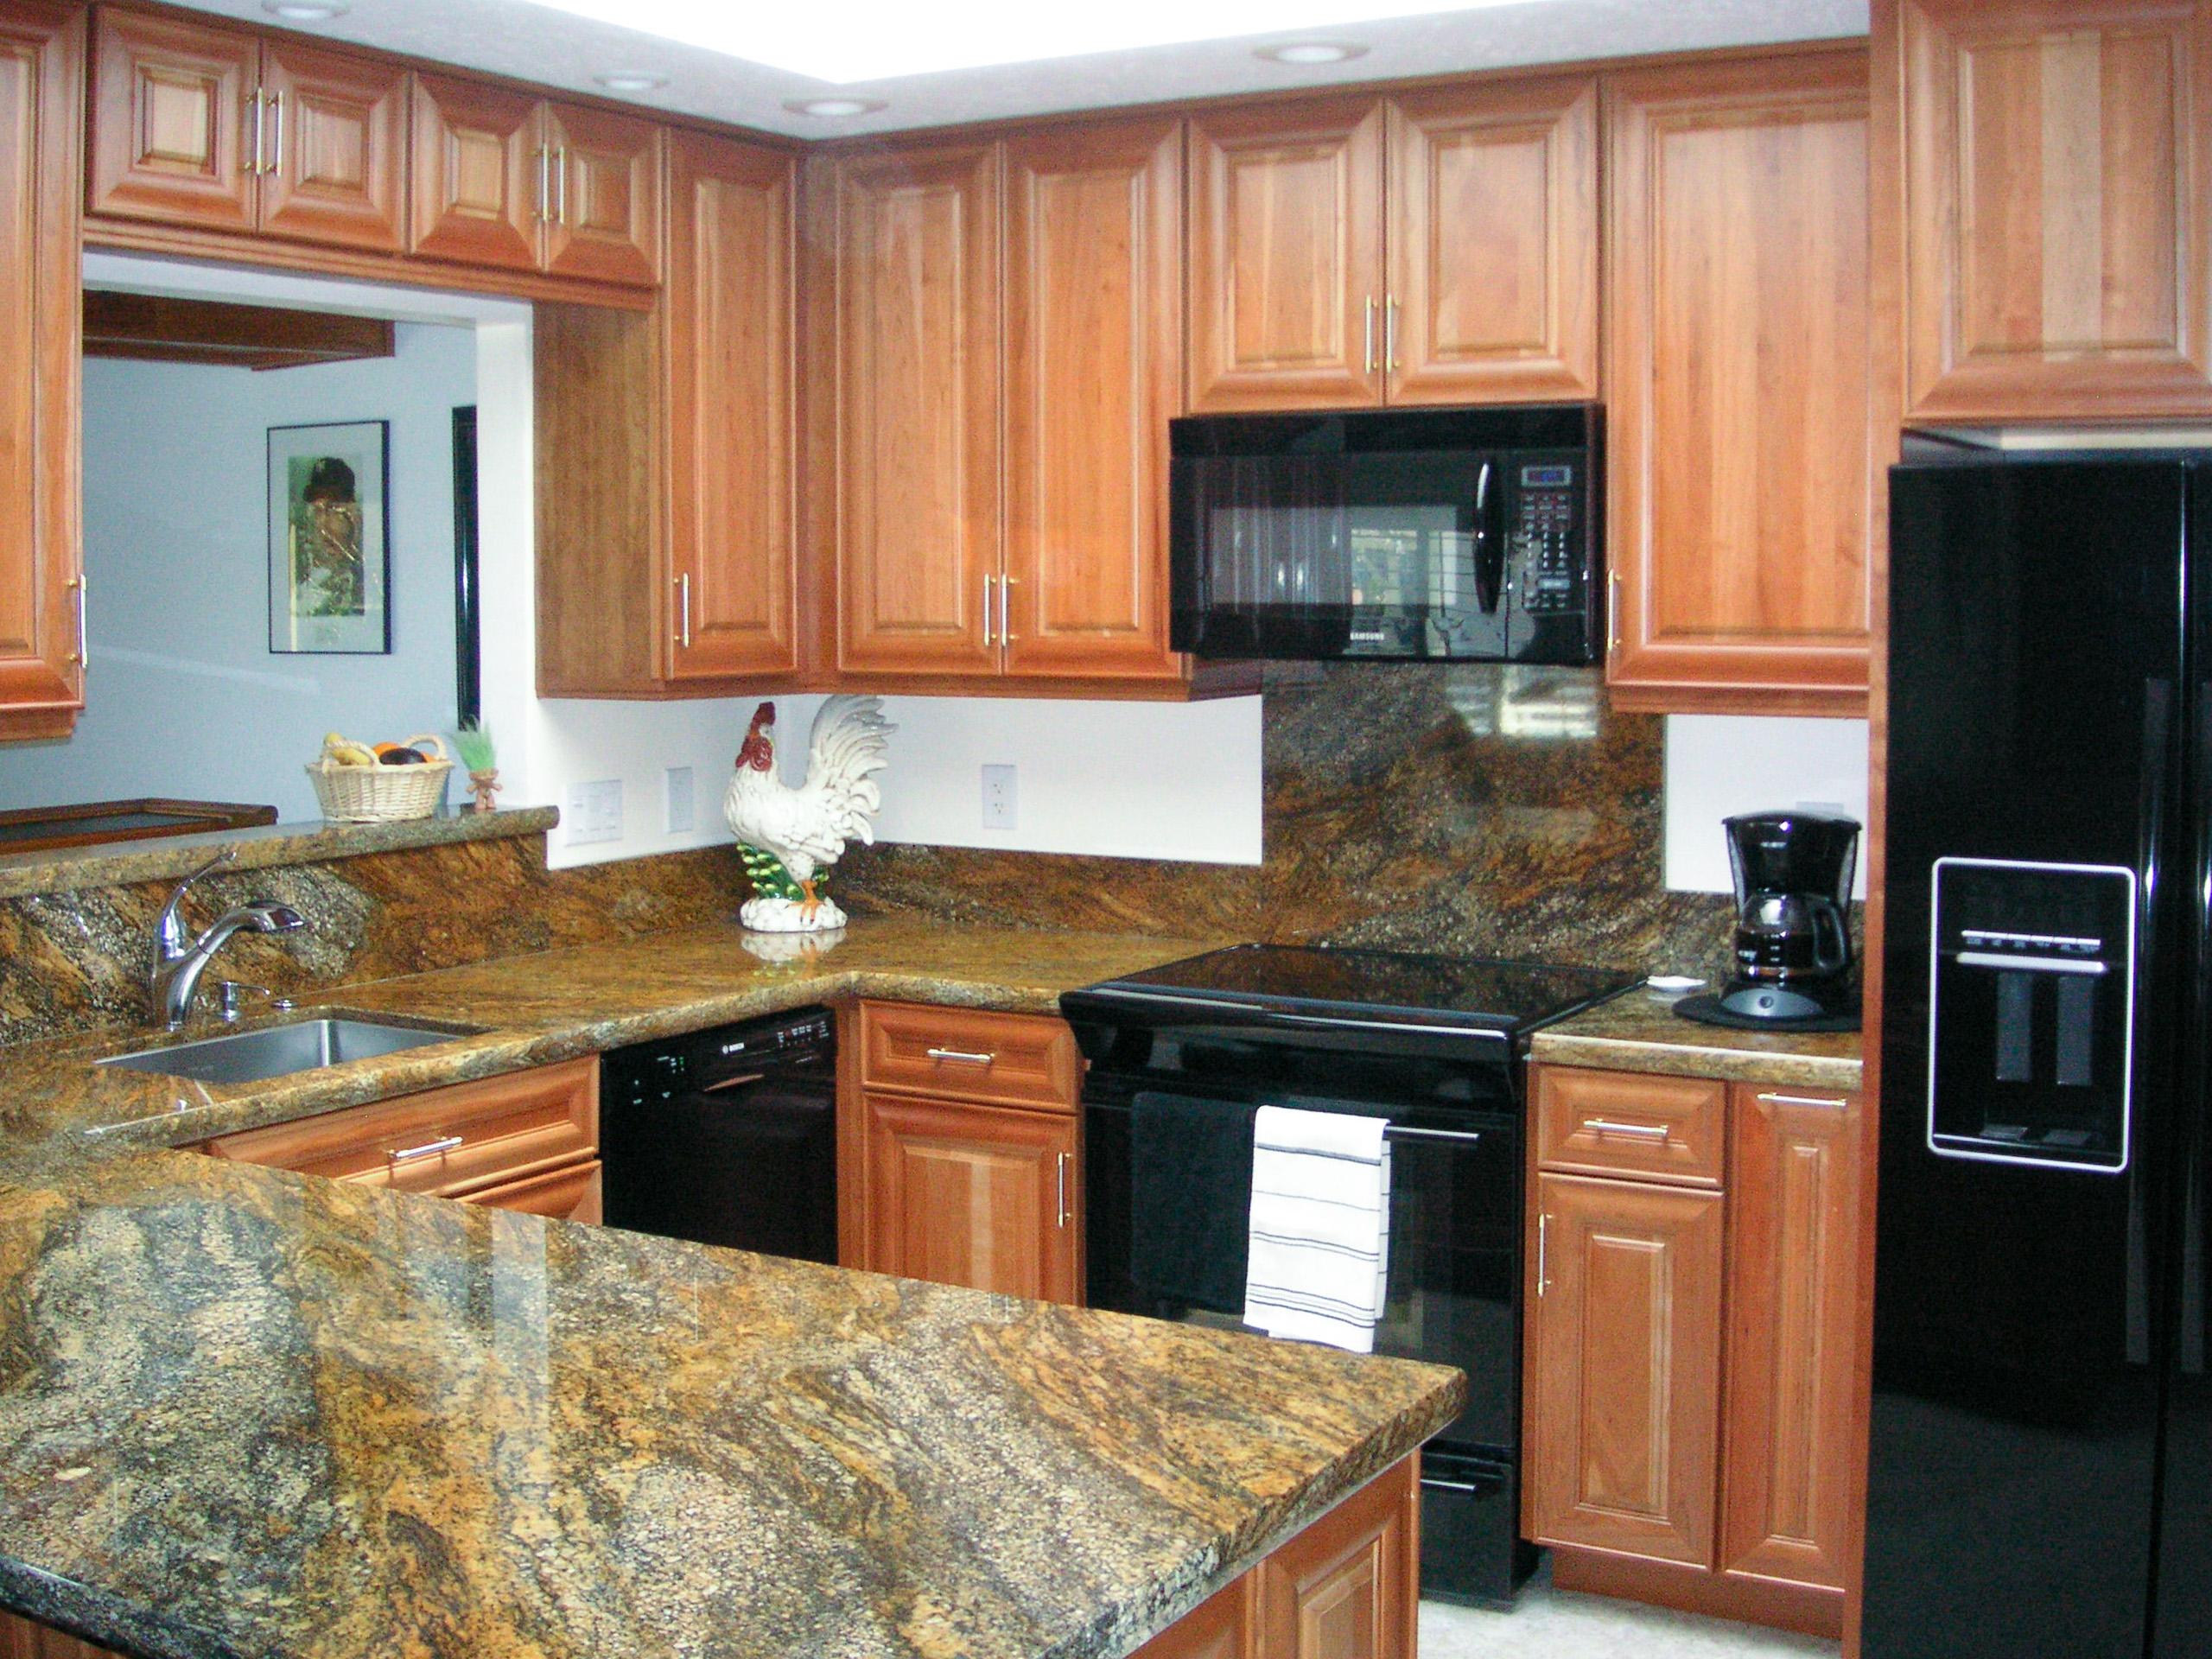 Picture of An "after" shot of a kitchen remodeling project by Dahme Construction - Dahme Construction